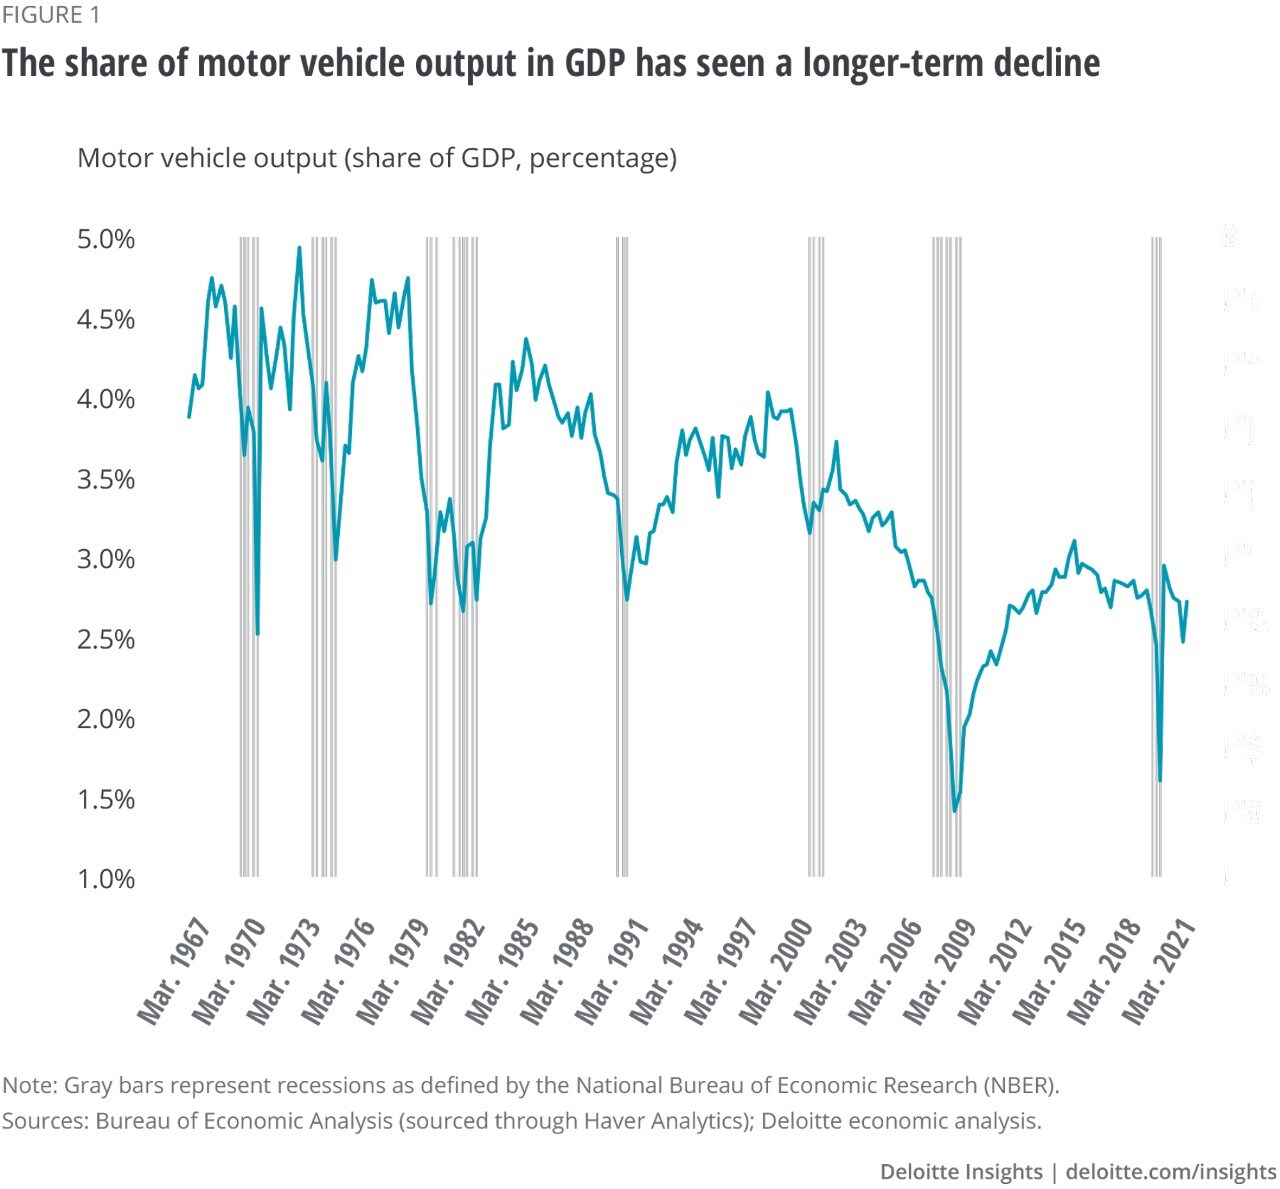 Figure 1. The share of motor vehicle output in GDP has seen a longer-term decline